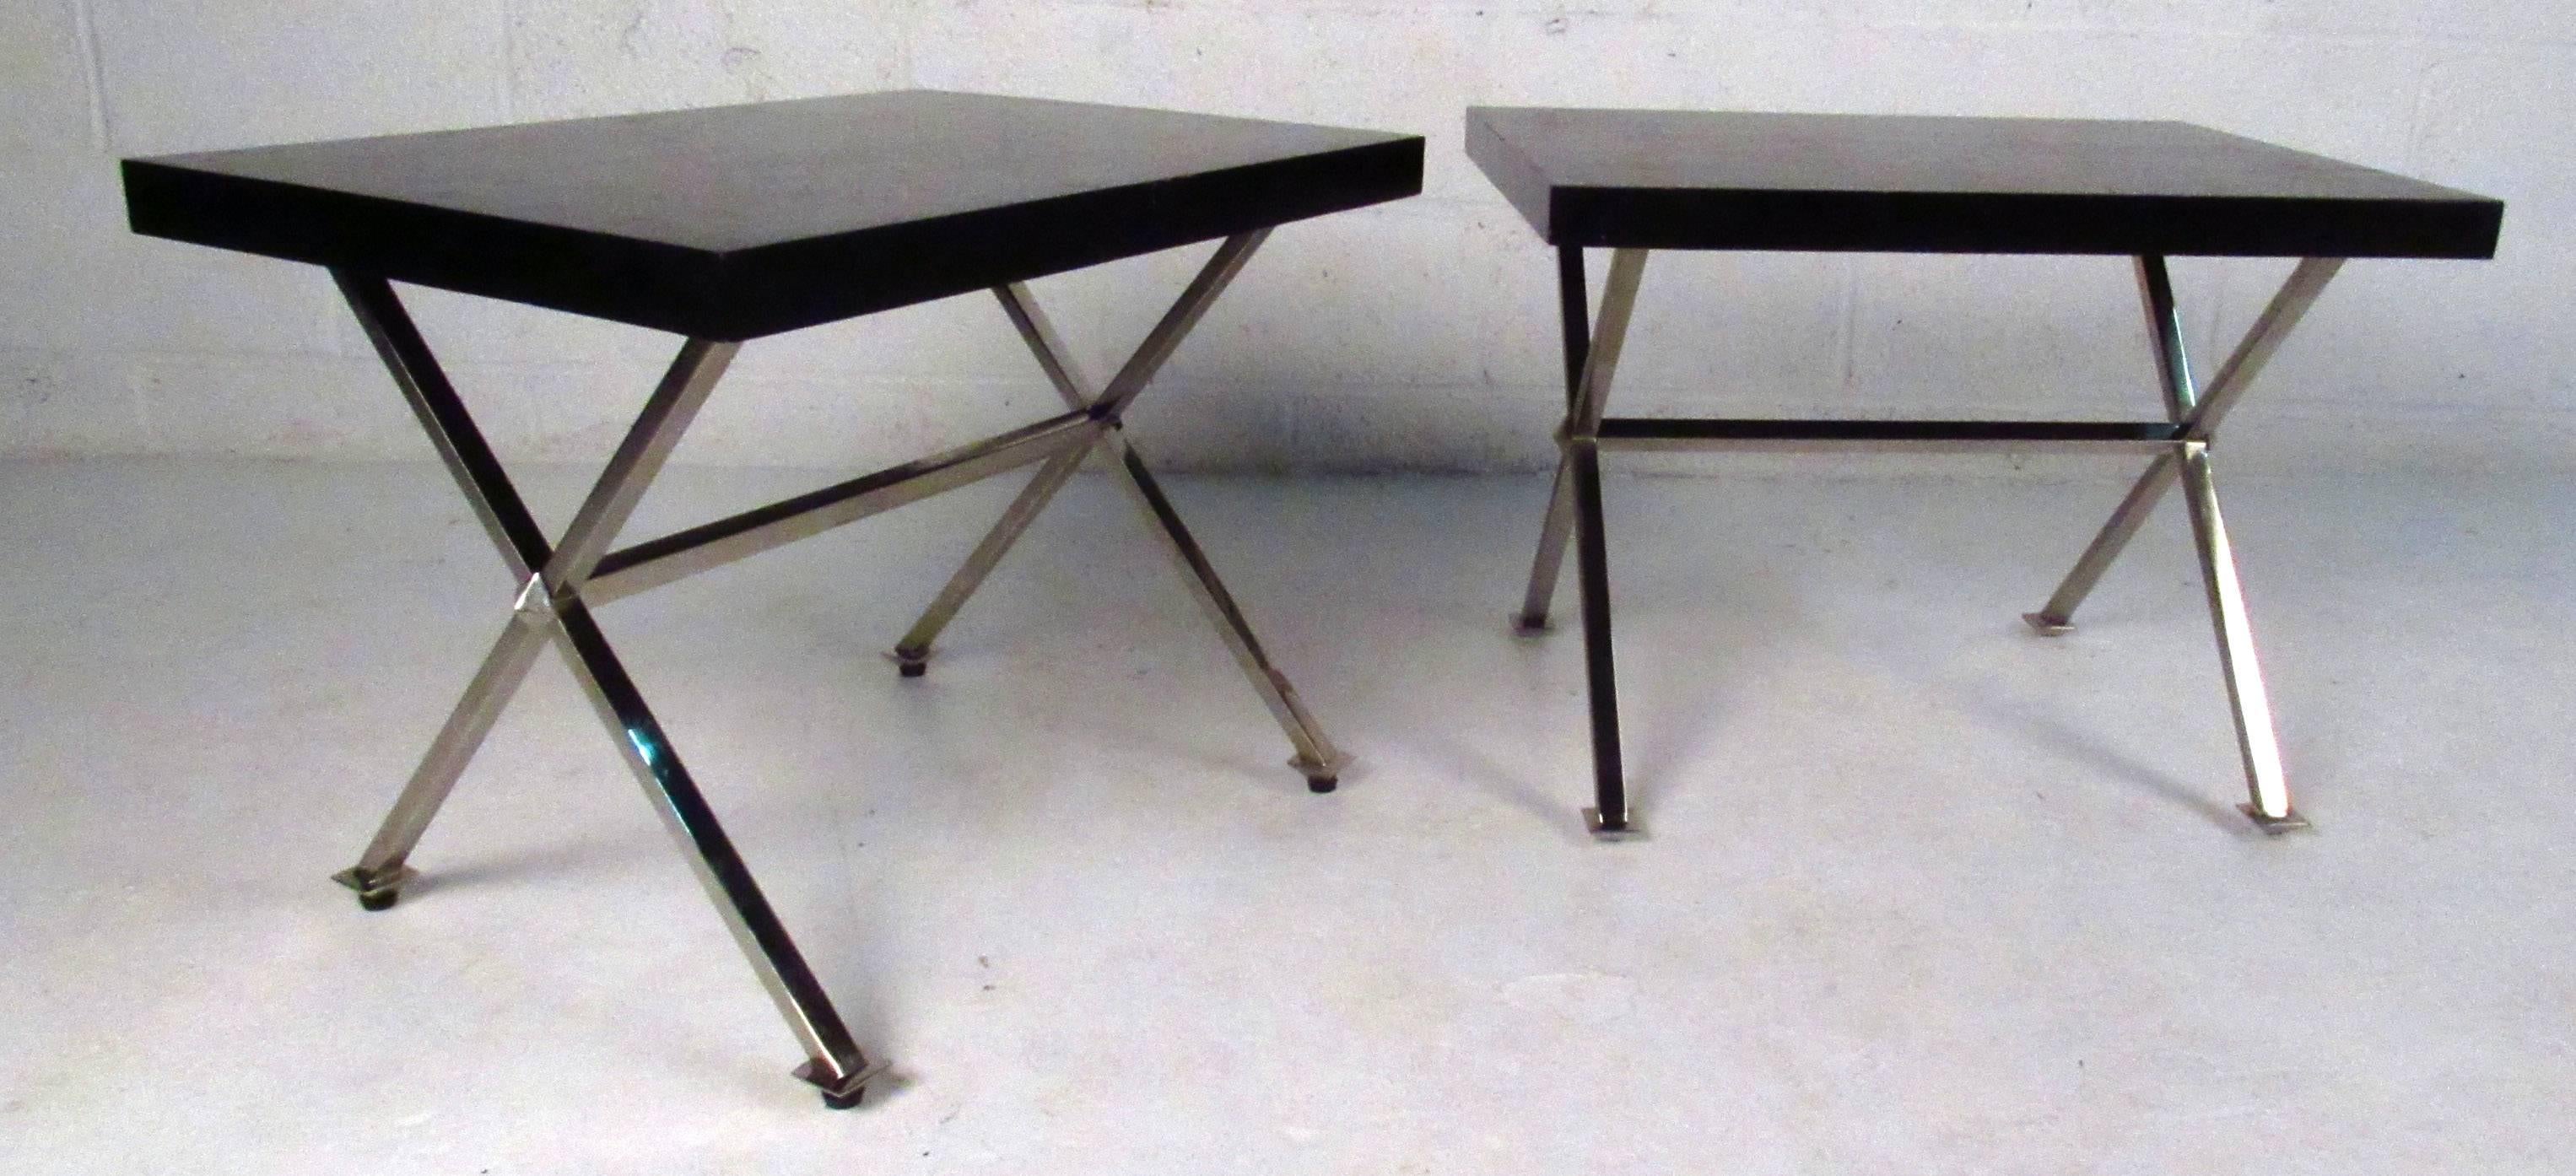 Two vintage-modern end tables each featuring a painted black top and sturdy chrome x-base. This sleek pair makes the perfect addition to any home, business, or office.

Please confirm item location NY or NJ with dealer.